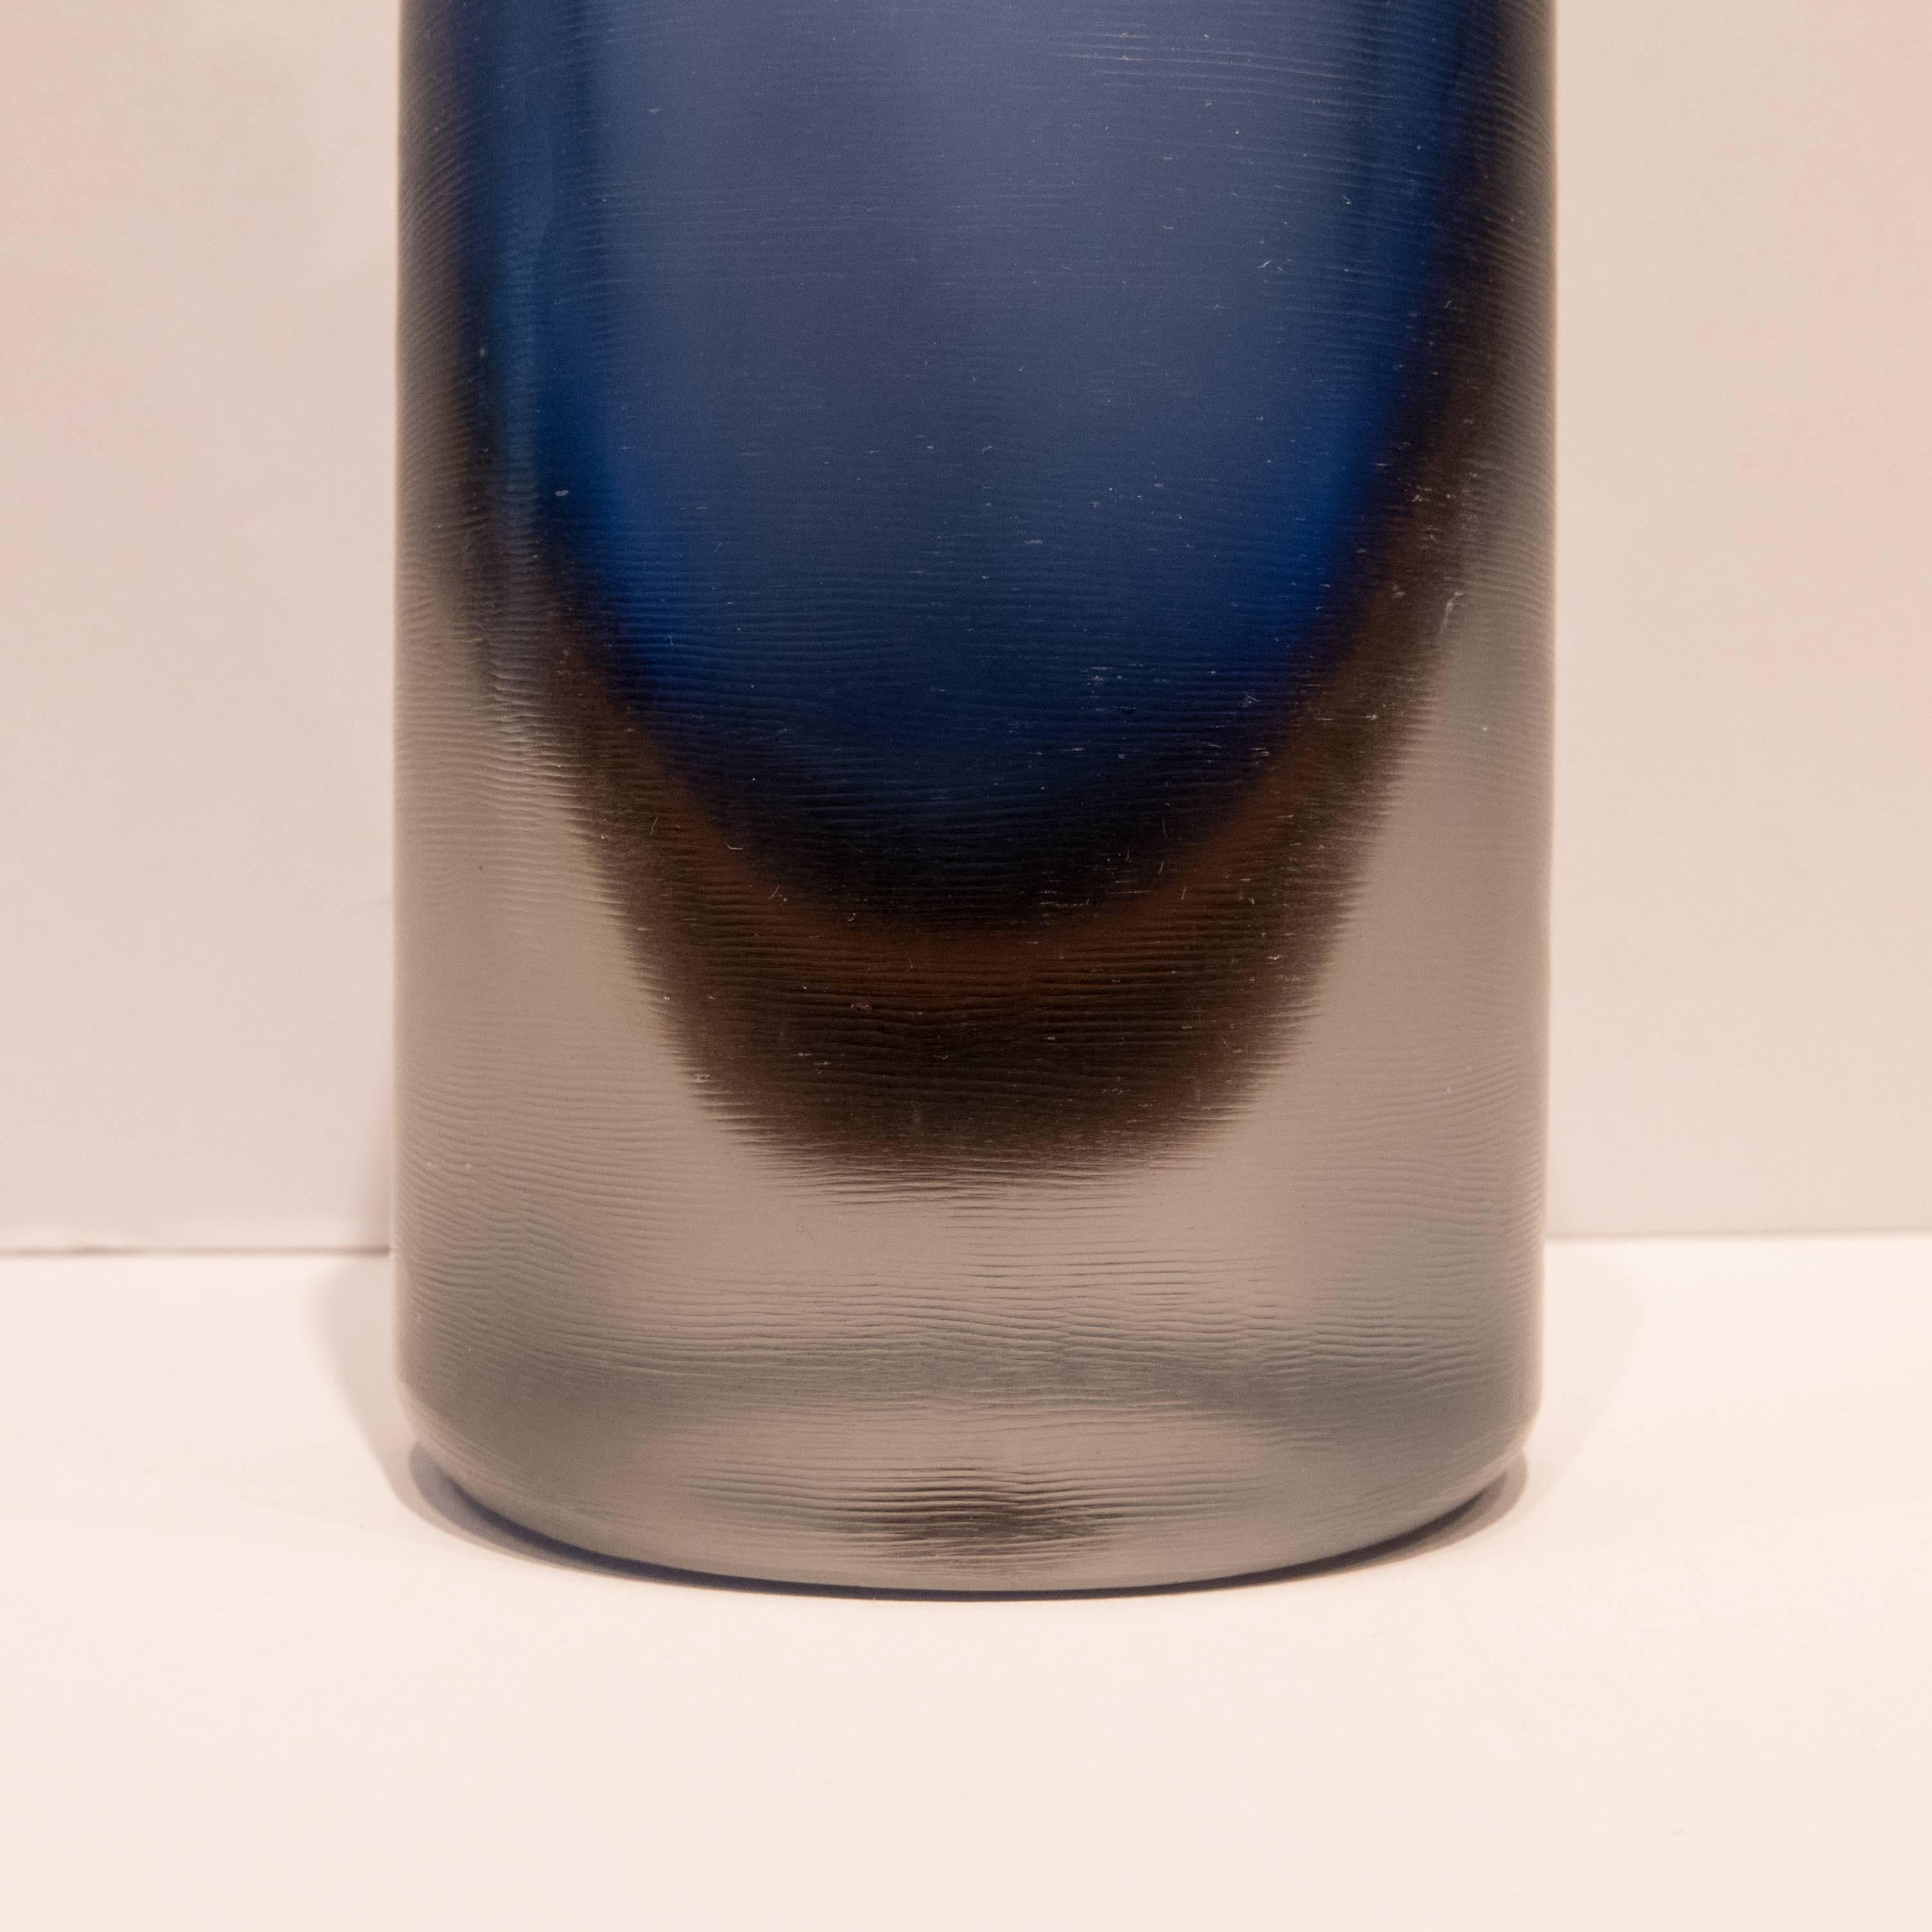 Paolo Venini Bottle with Stopper 3